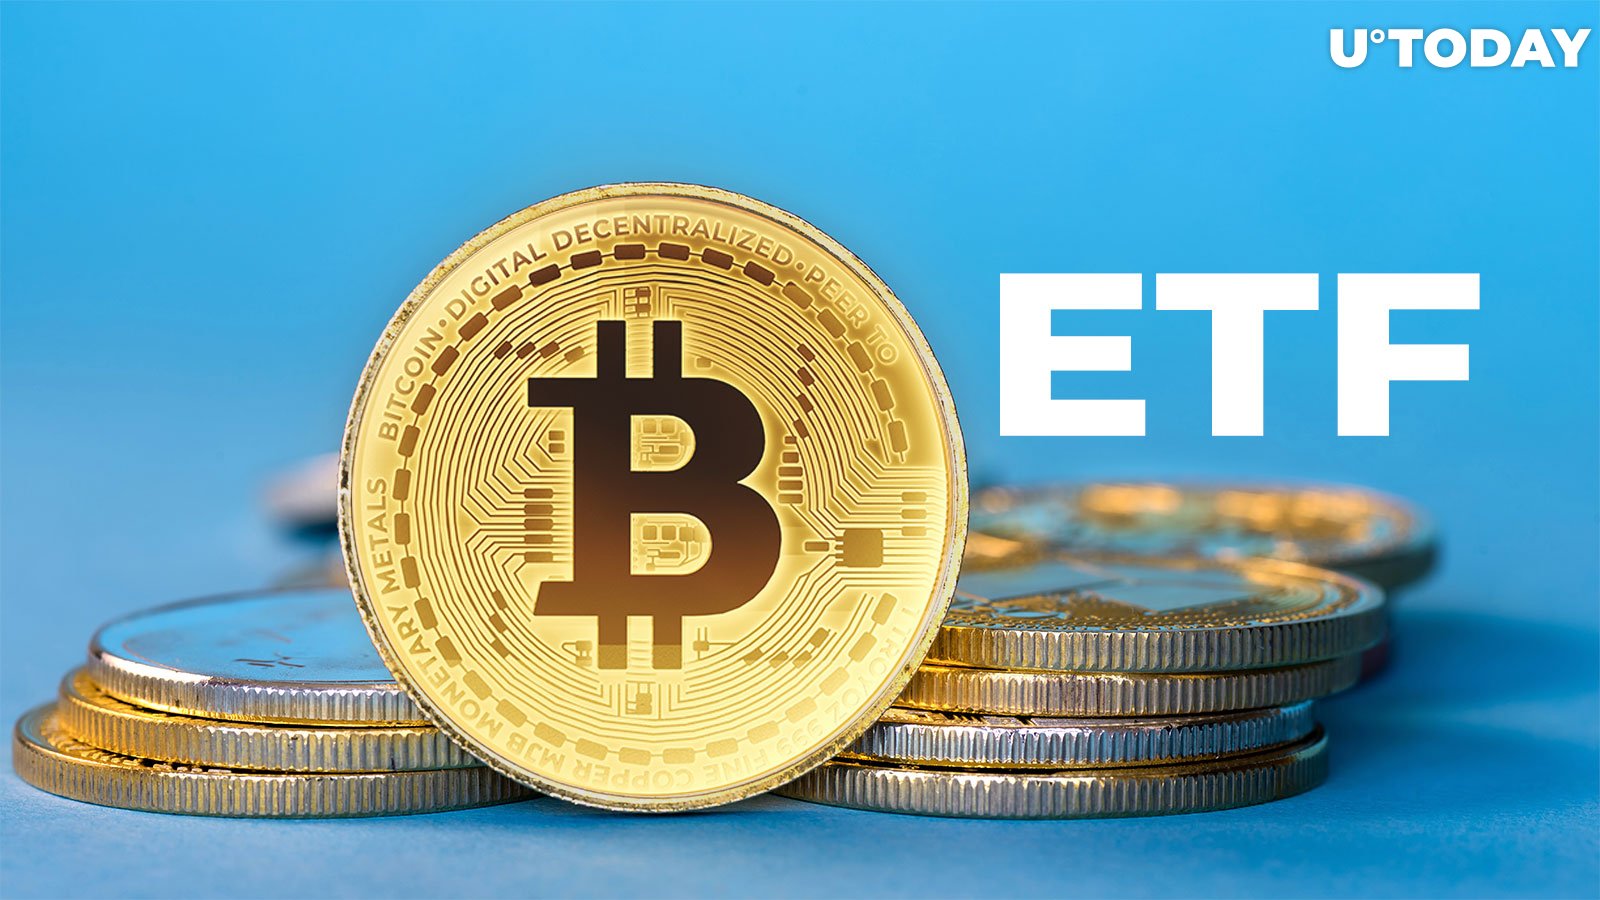 As Bitcoin (BTC) Price Hits $39,000, Spot BTC ETF Finally Gets Official Approval Window